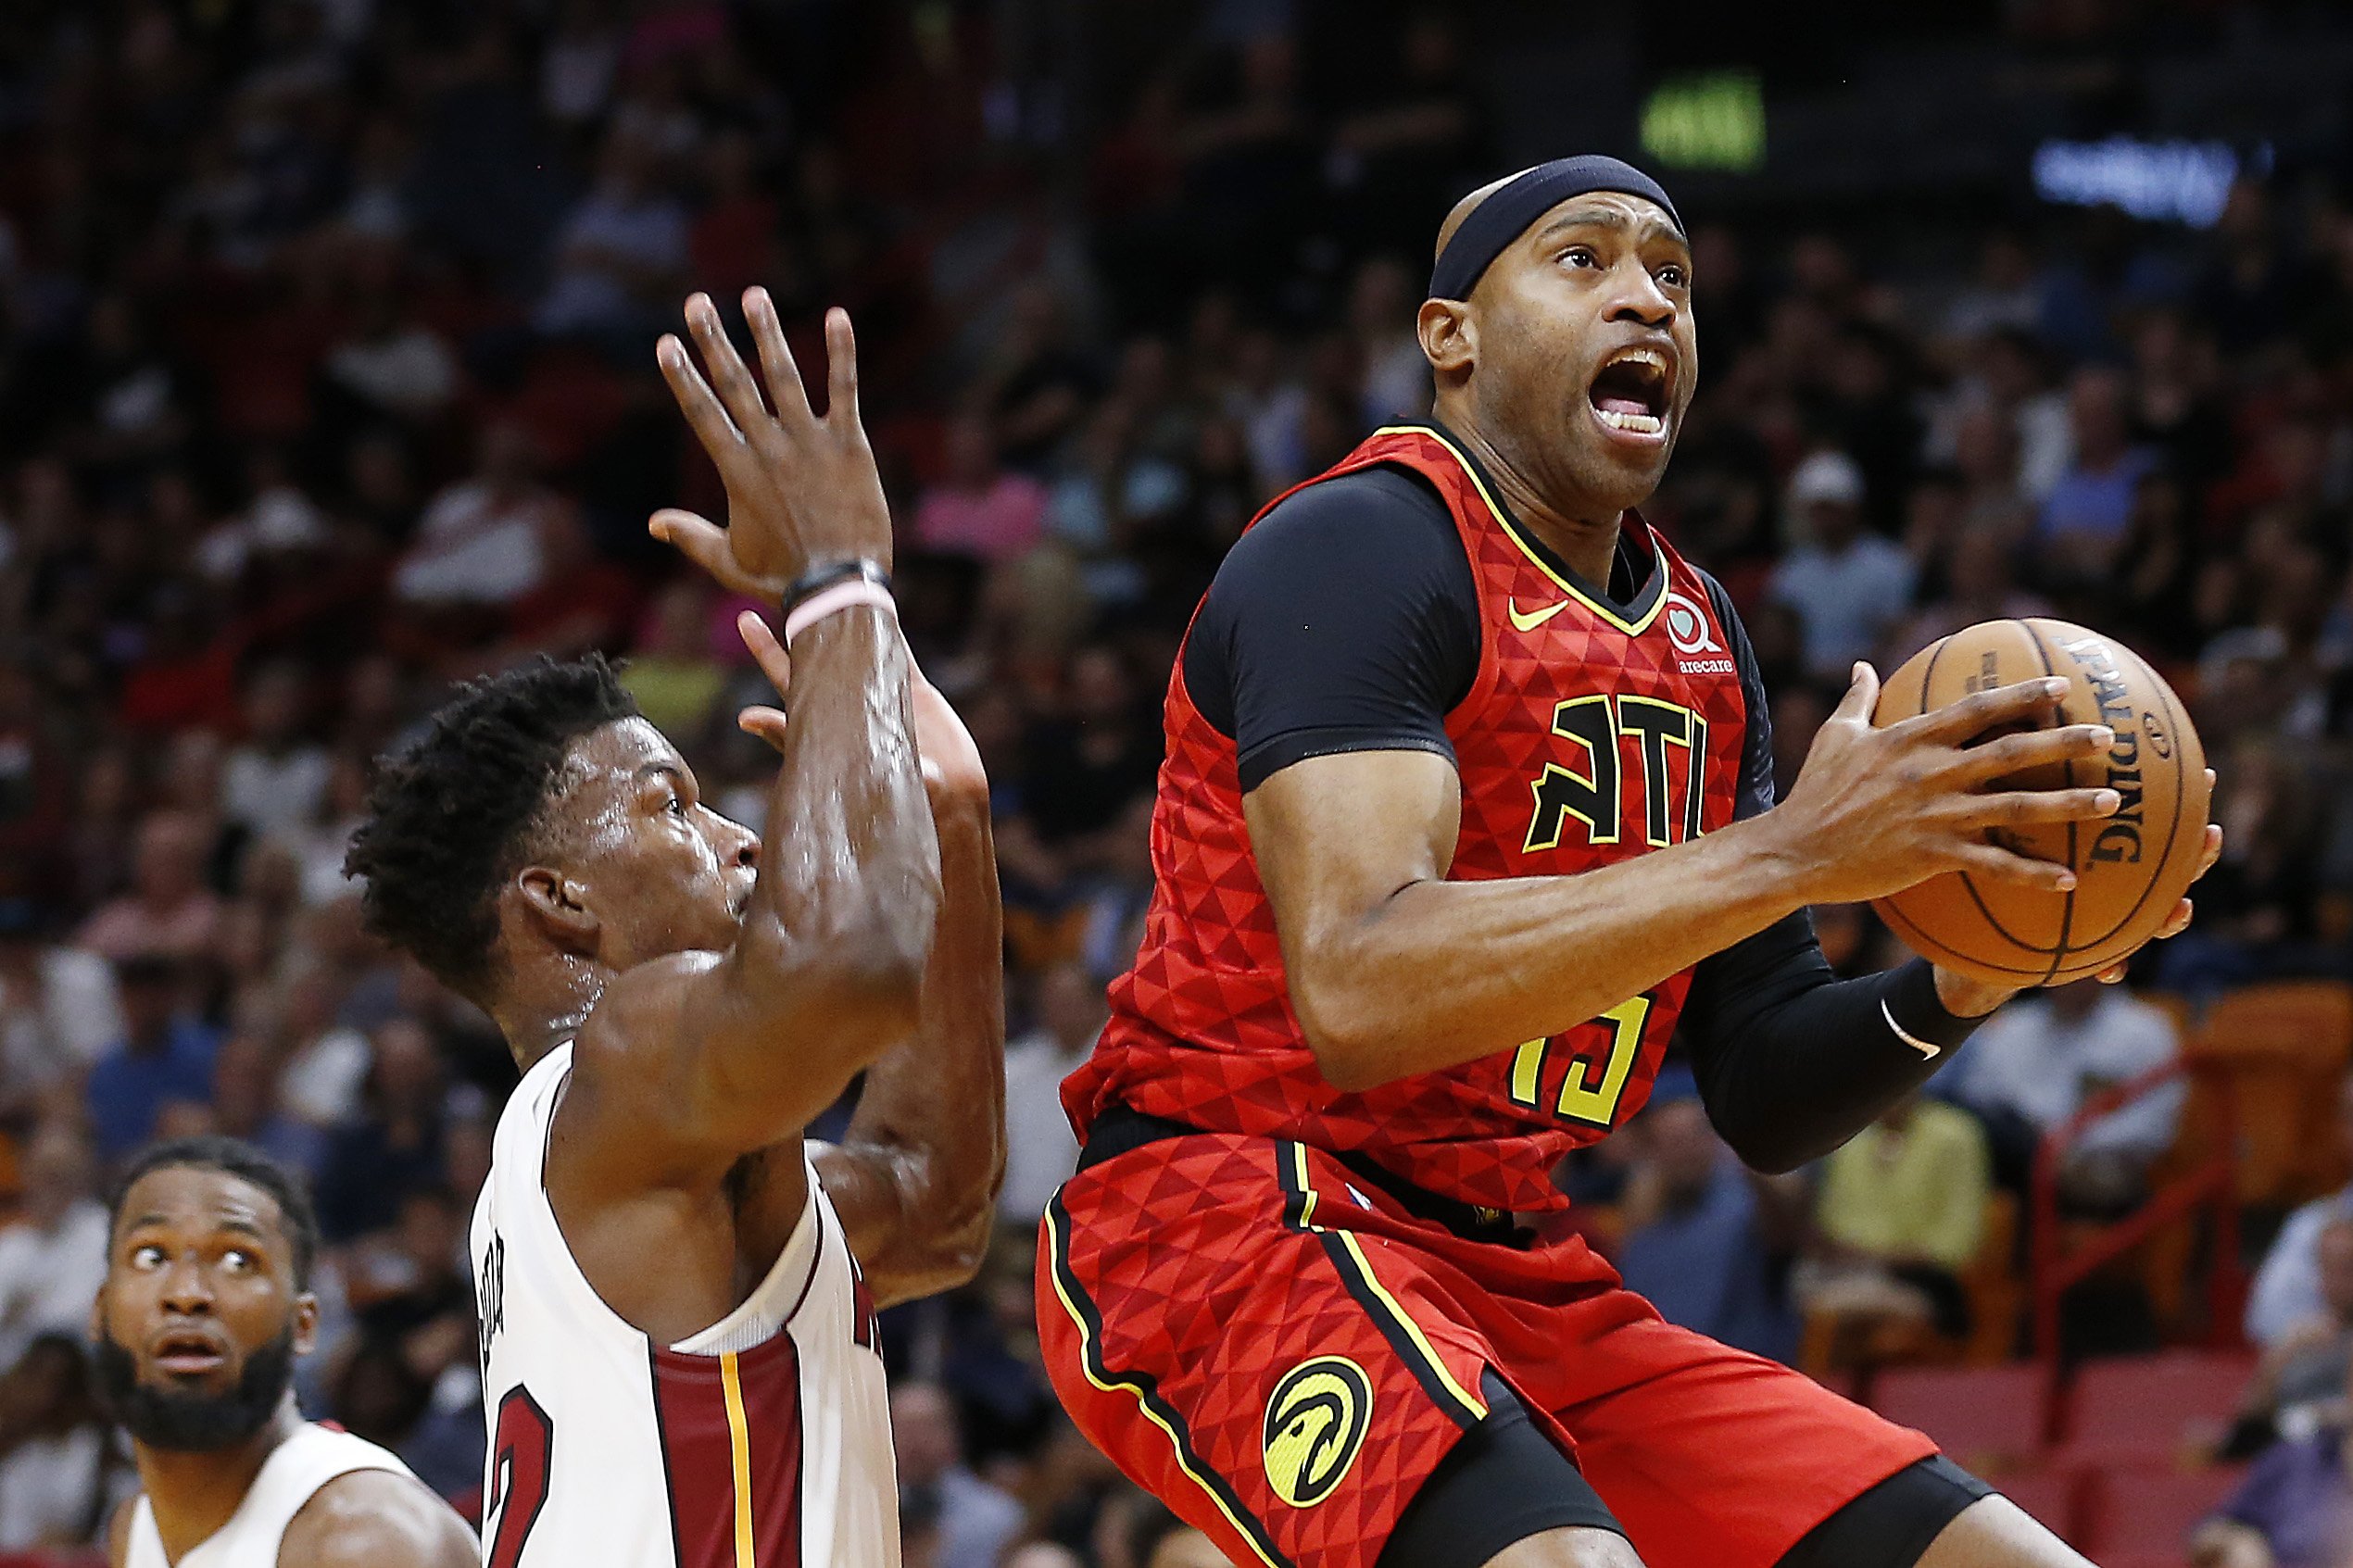 Vince Carter #15 of the Atlanta Hawks attempts a layup against Jimmy Butler #22 of the Miami Heat during the first half at American Airlines Arena on October 29, 2019 in Miami, Florida. | Source: Getty Images